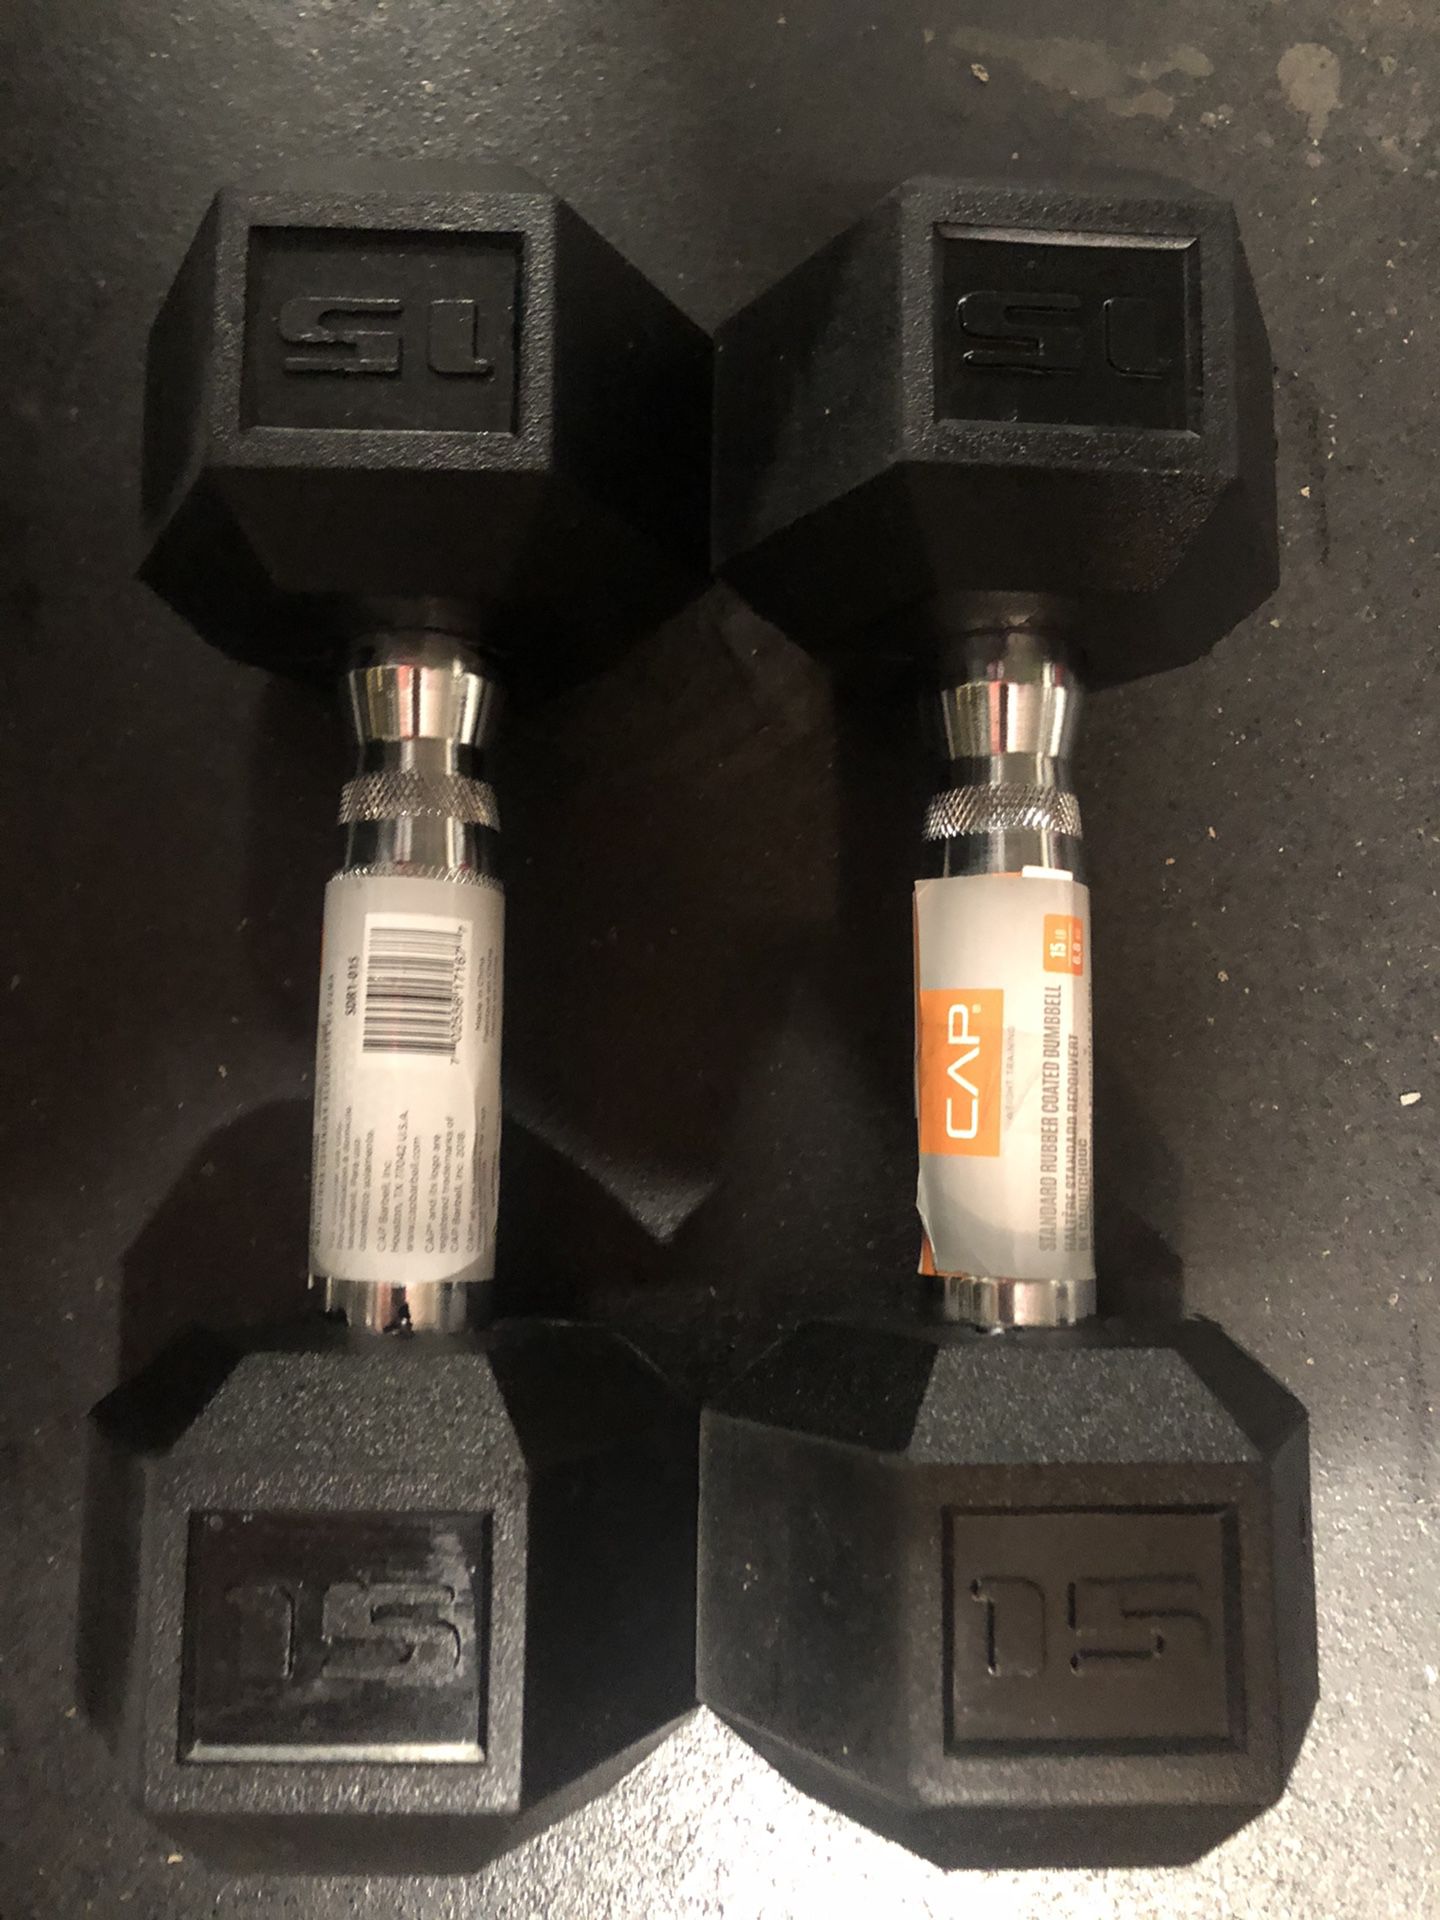 Pair of CAP 15lb Rubber Hex Dumbbells - New with Tags